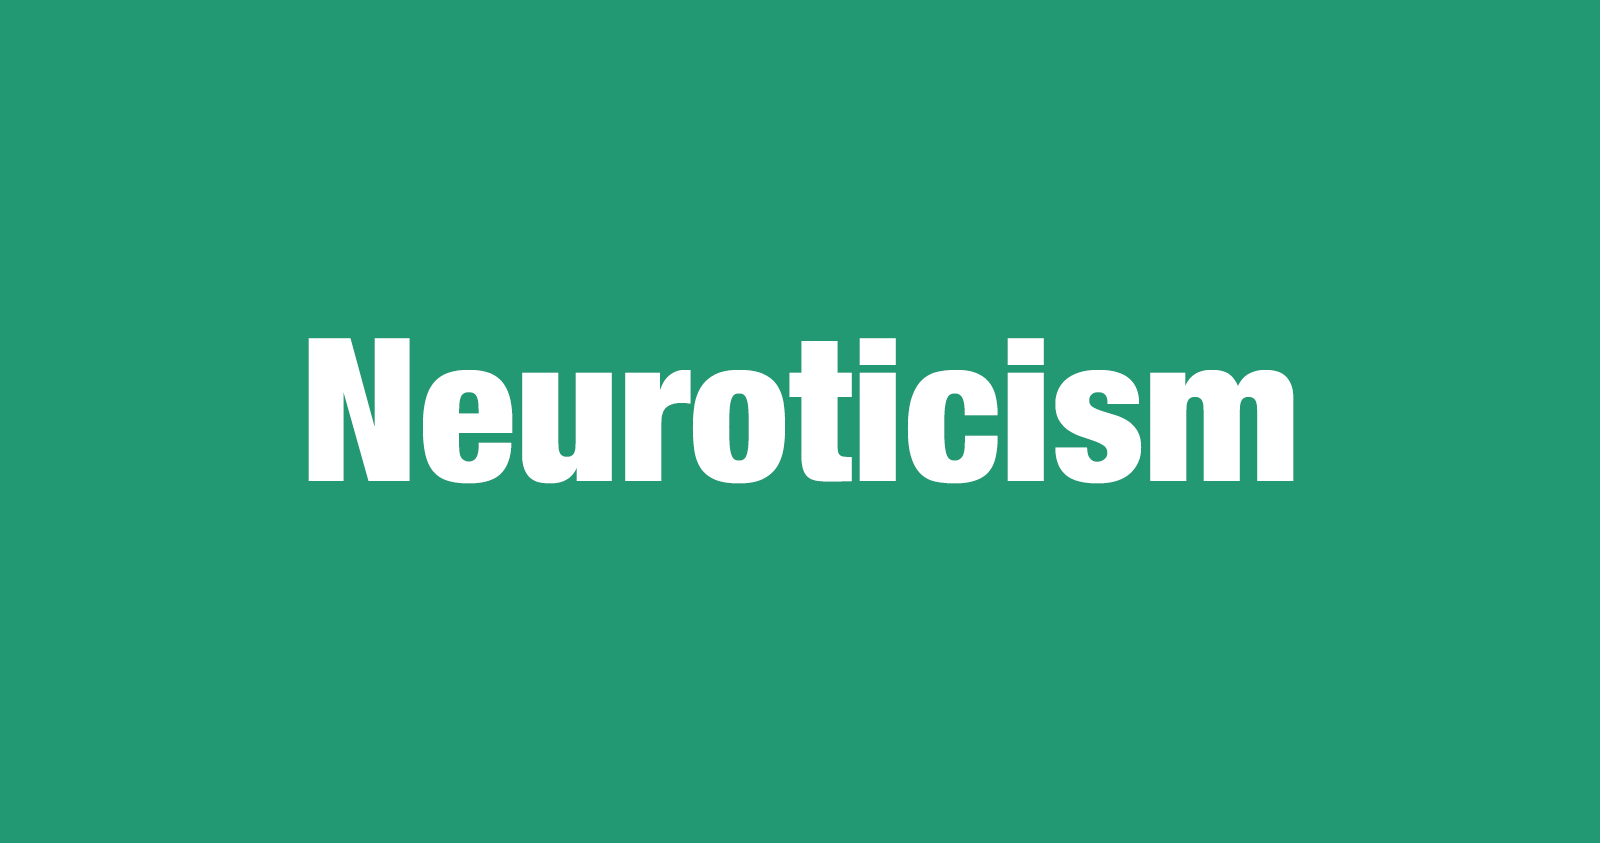 What is Neuroticism?